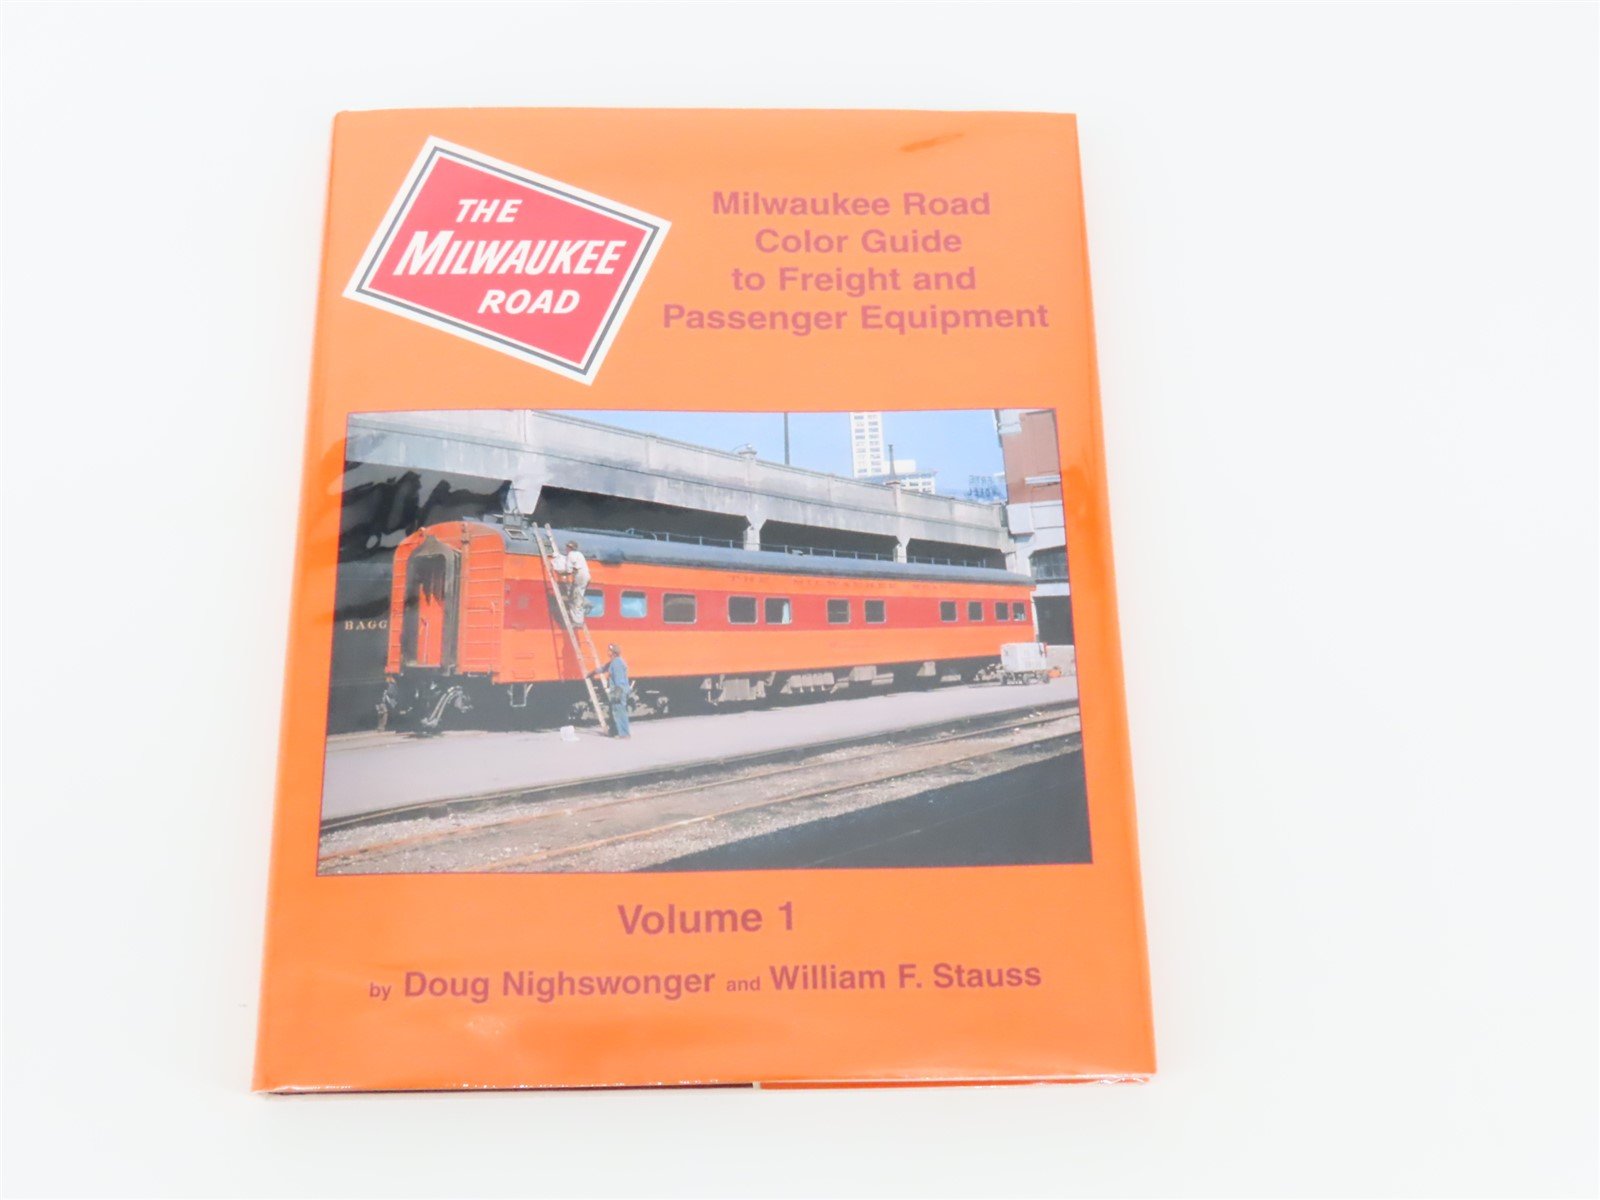 Morning Sun: Milwaukee Road Color Guide Volume 1 by Nighswonger & Stauss ©1999